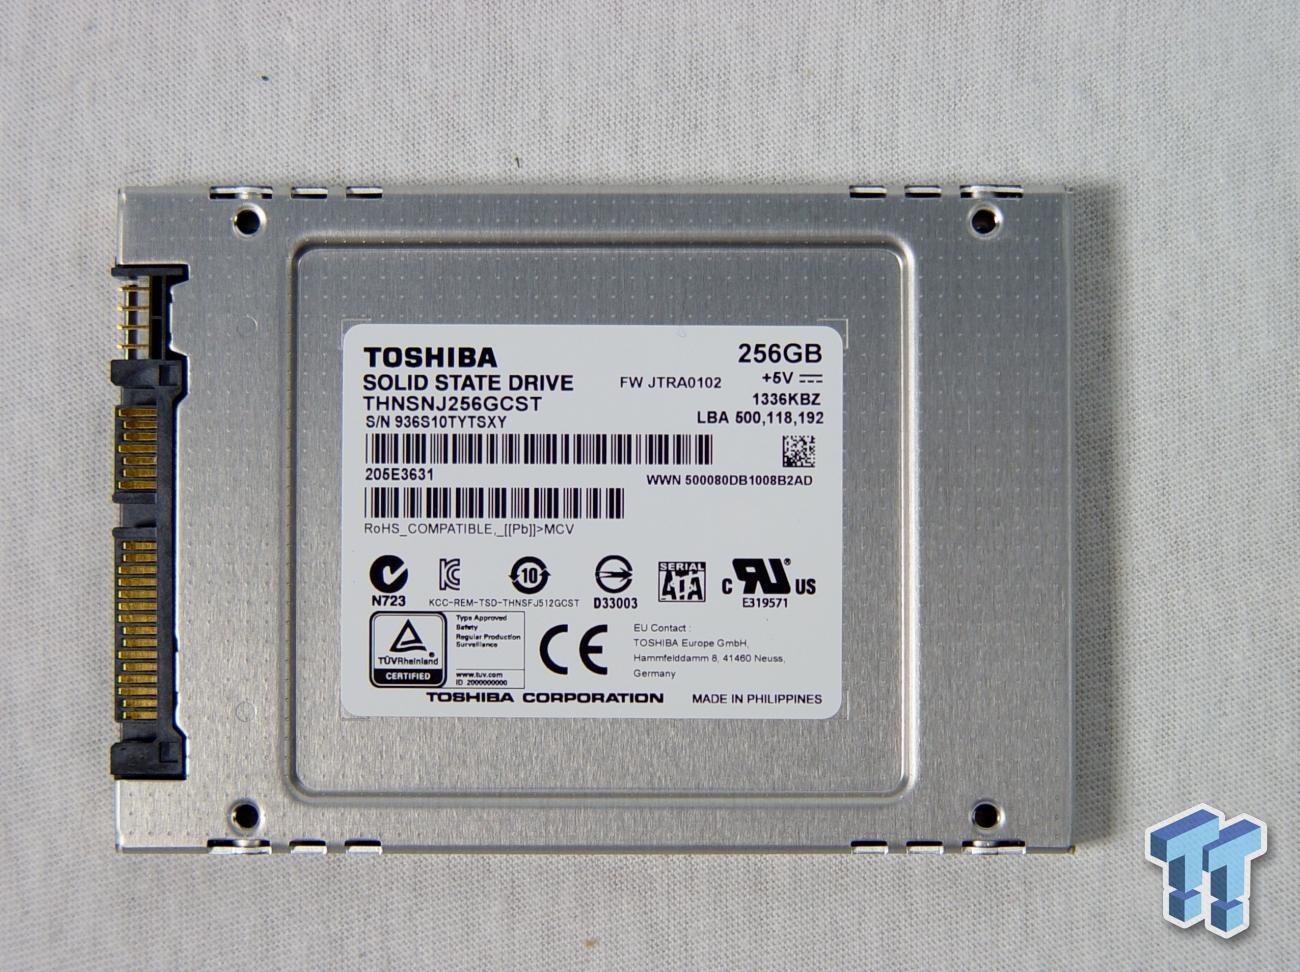 Toshiba Q Series Pro 256GB SSD Review - Offers Great Value